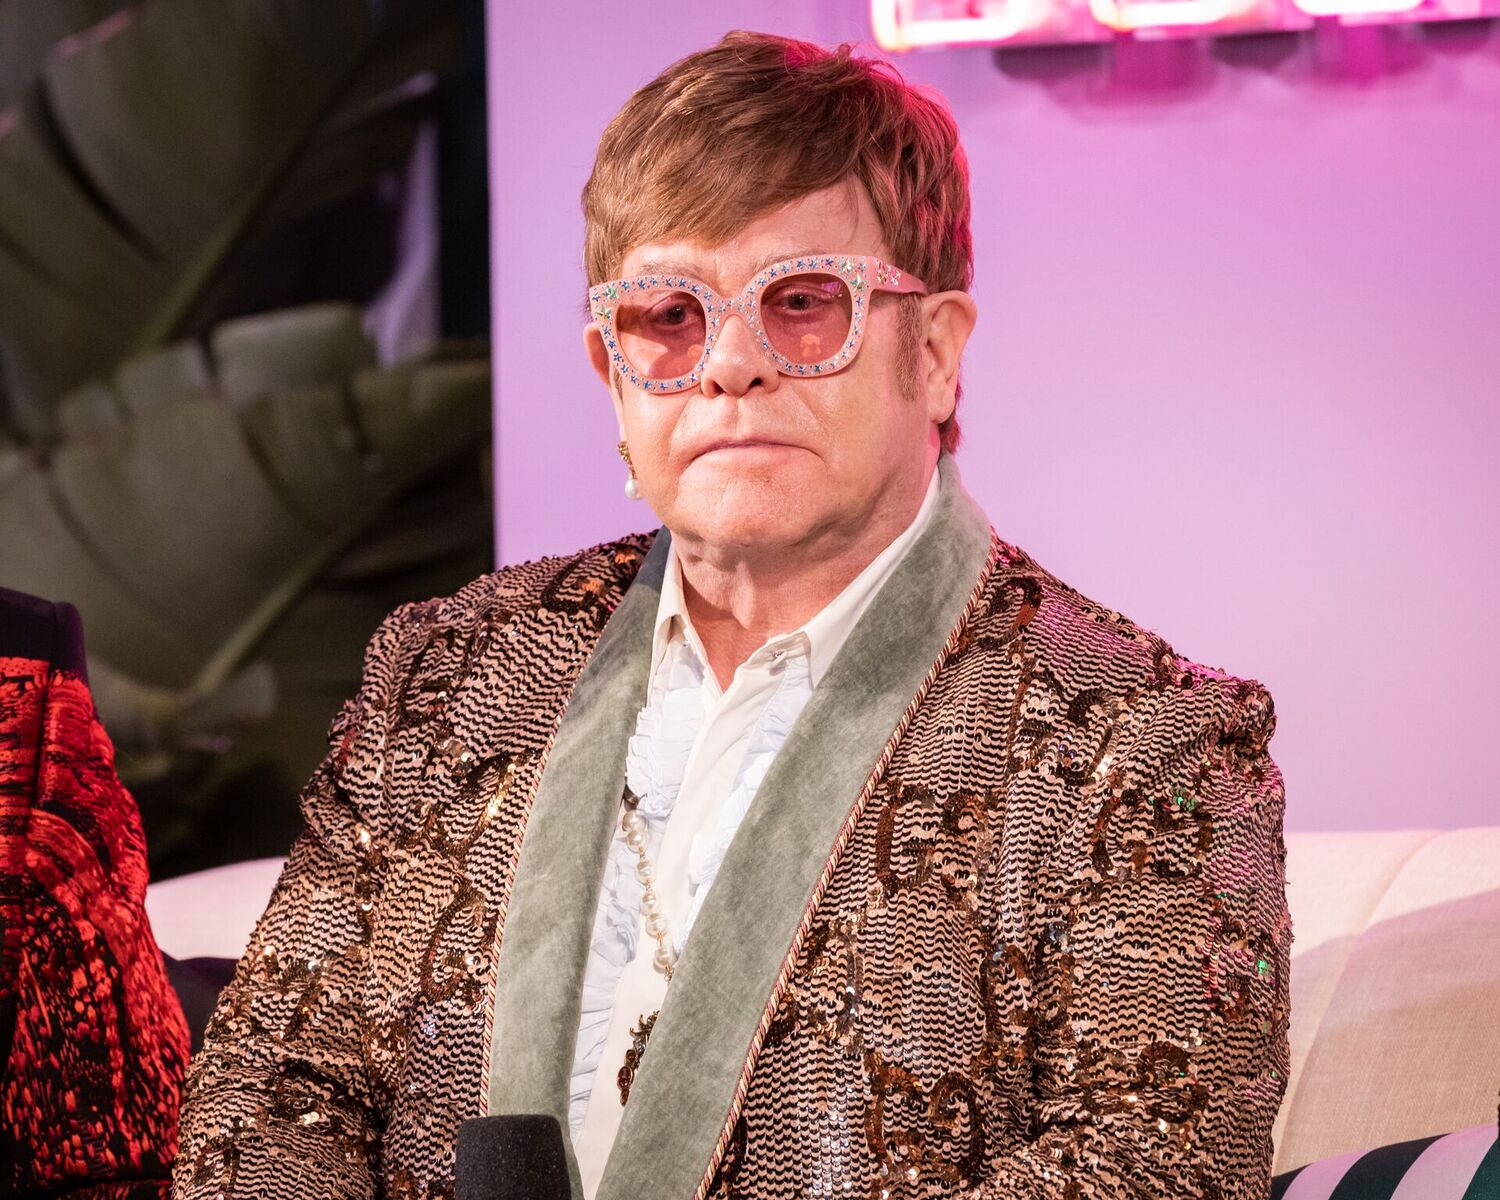  Elton John attends IMDb LIVE At The Elton John AIDS Foundation Academy Awards® Viewing Party on February 24, 2019 in Los Angeles, California | Photo: Getty Images